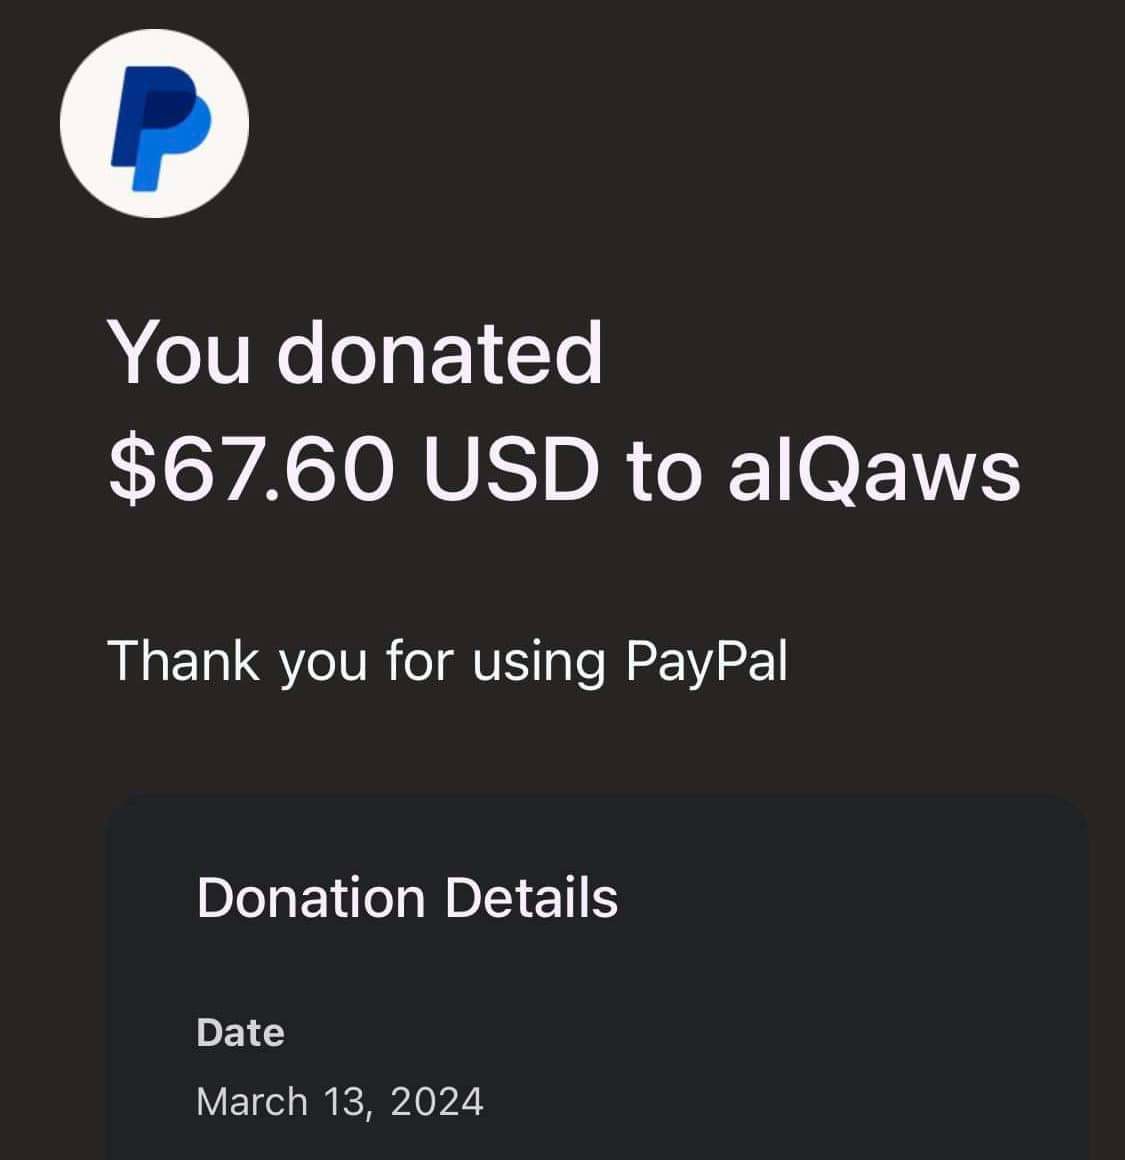 May be an image of text that says "P You donated $67.60 USD to alQaws Thank you for using PayPal Donation Details Date March 13, 2024"